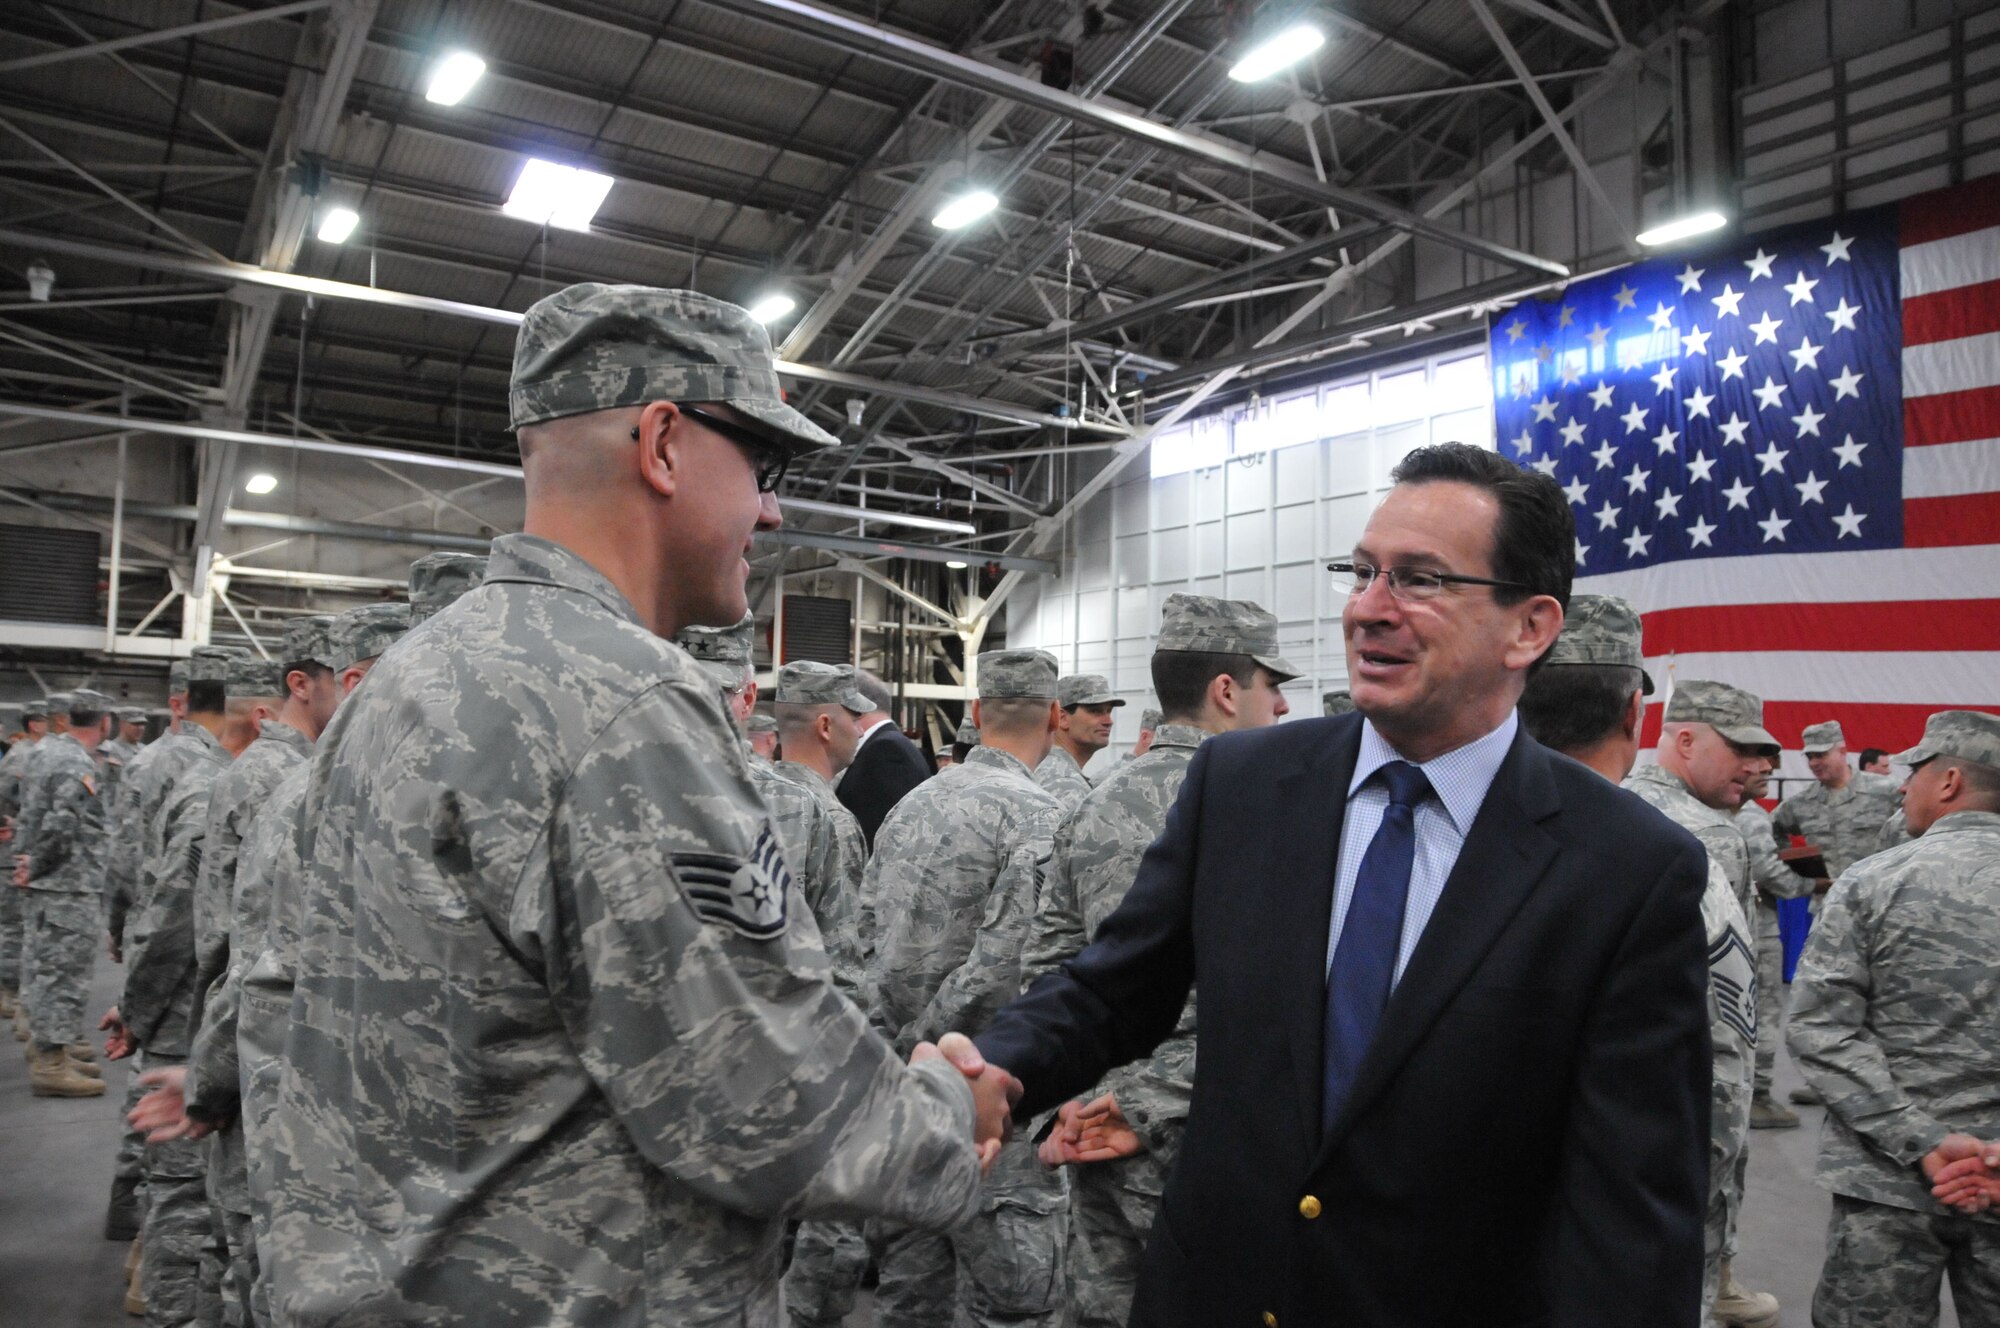 Connecticut Governor Dannel P. Malloy congratulates and thanks Staff Sgt. Derek Egerman of the 103rd Civil Engineer Squadron for his service following a formal Joint Freedom Salute Ceremony in the main hangar at Bradley Air National Guard Base in East Granby, Conn. March 31, 2012. Airmen and Soldiers of the Connecticut National Guard were formally welcomed home and honored following deployments over the past year. (U.S. Air Force photo by Tech. Sgt. Erin McNamara\RELEASED)